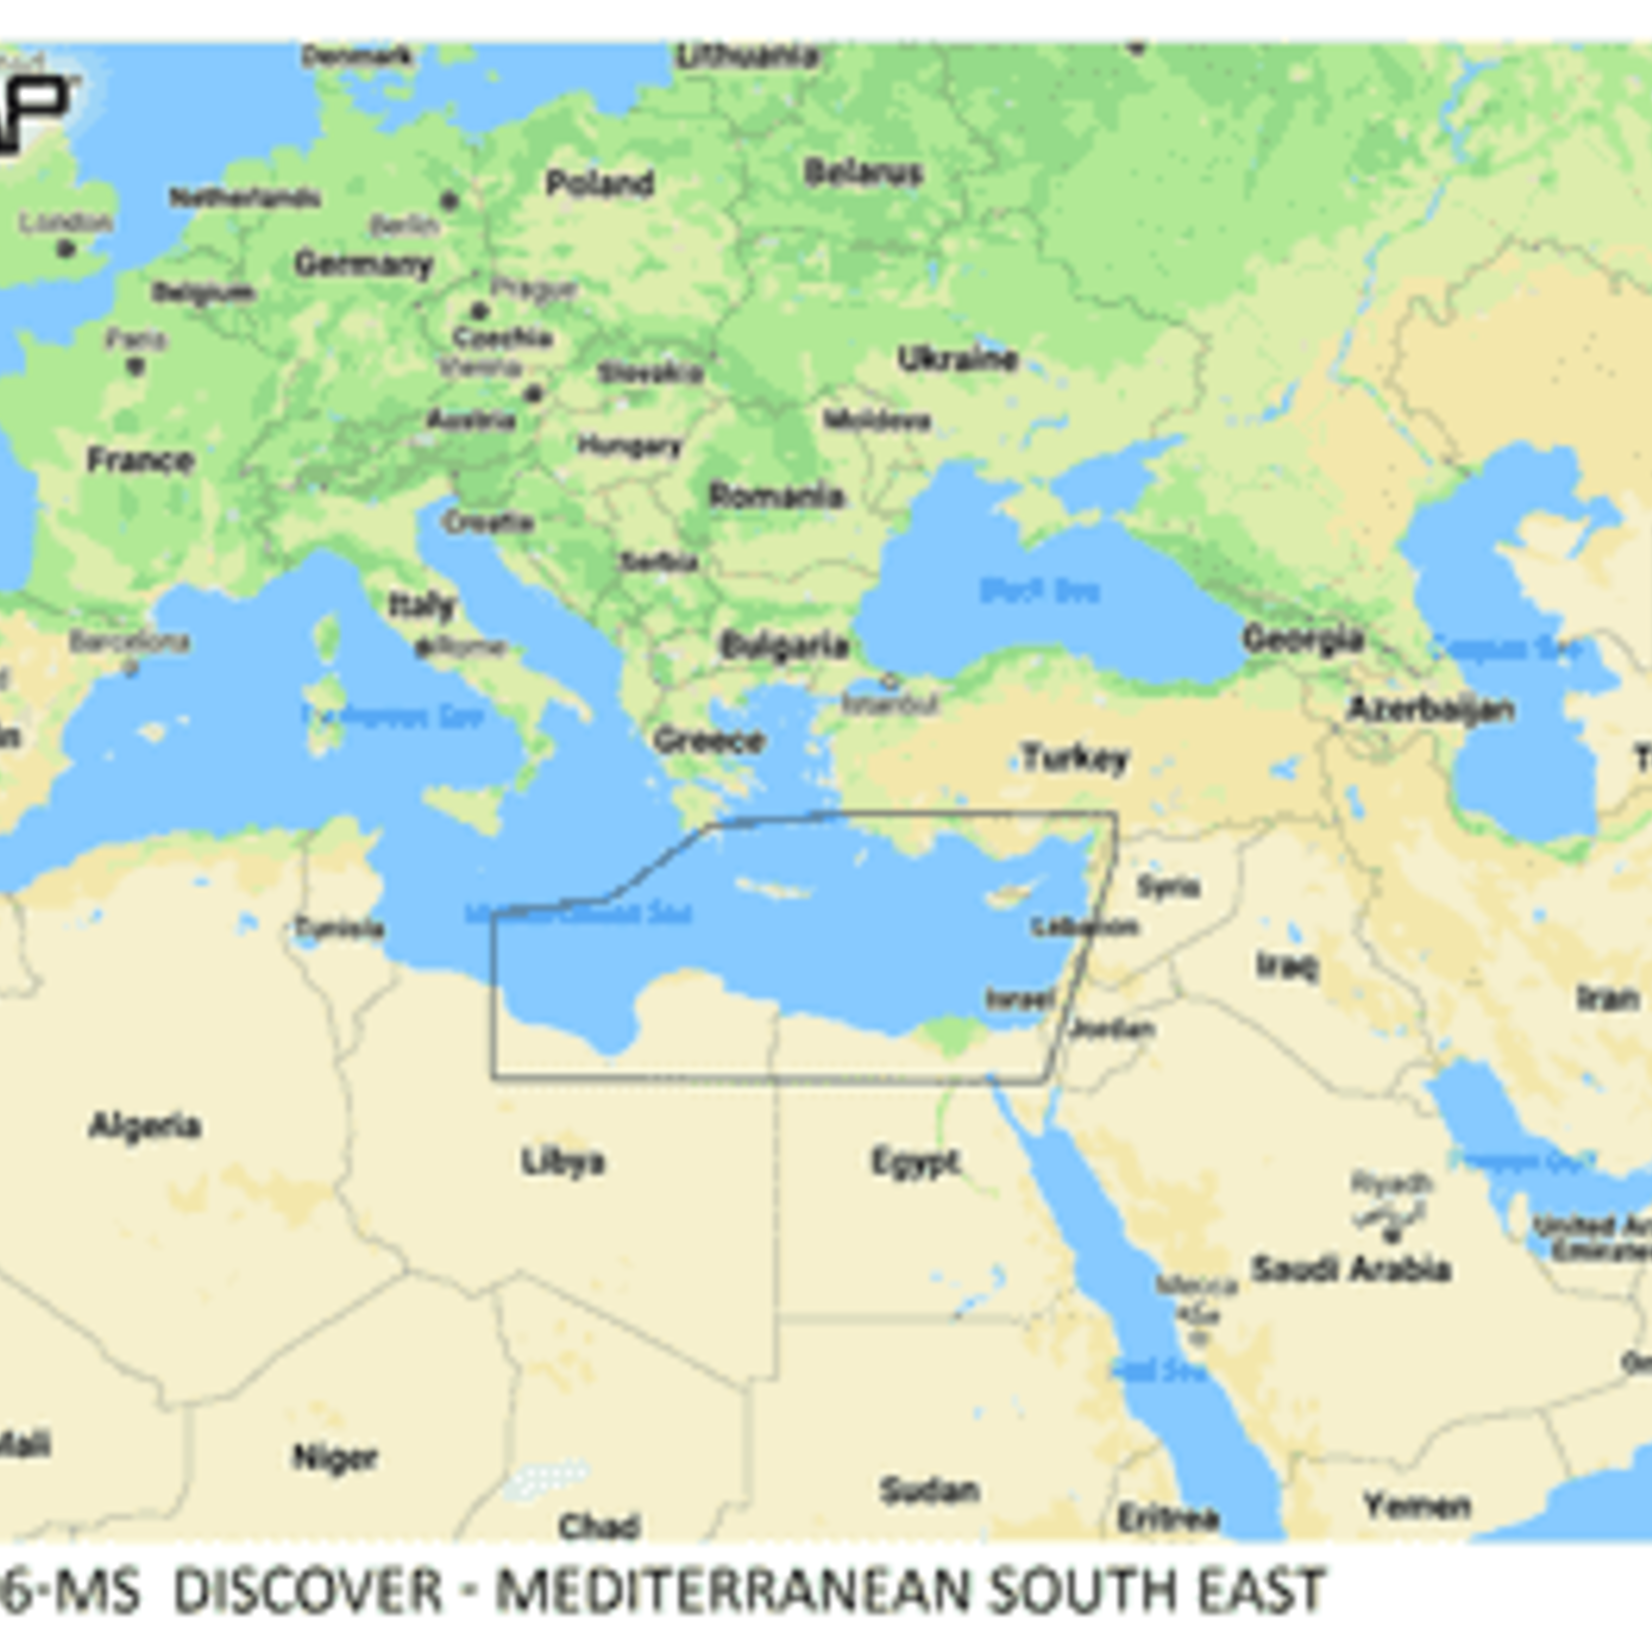 C-MAP DISCOVER - Mediterranean South East